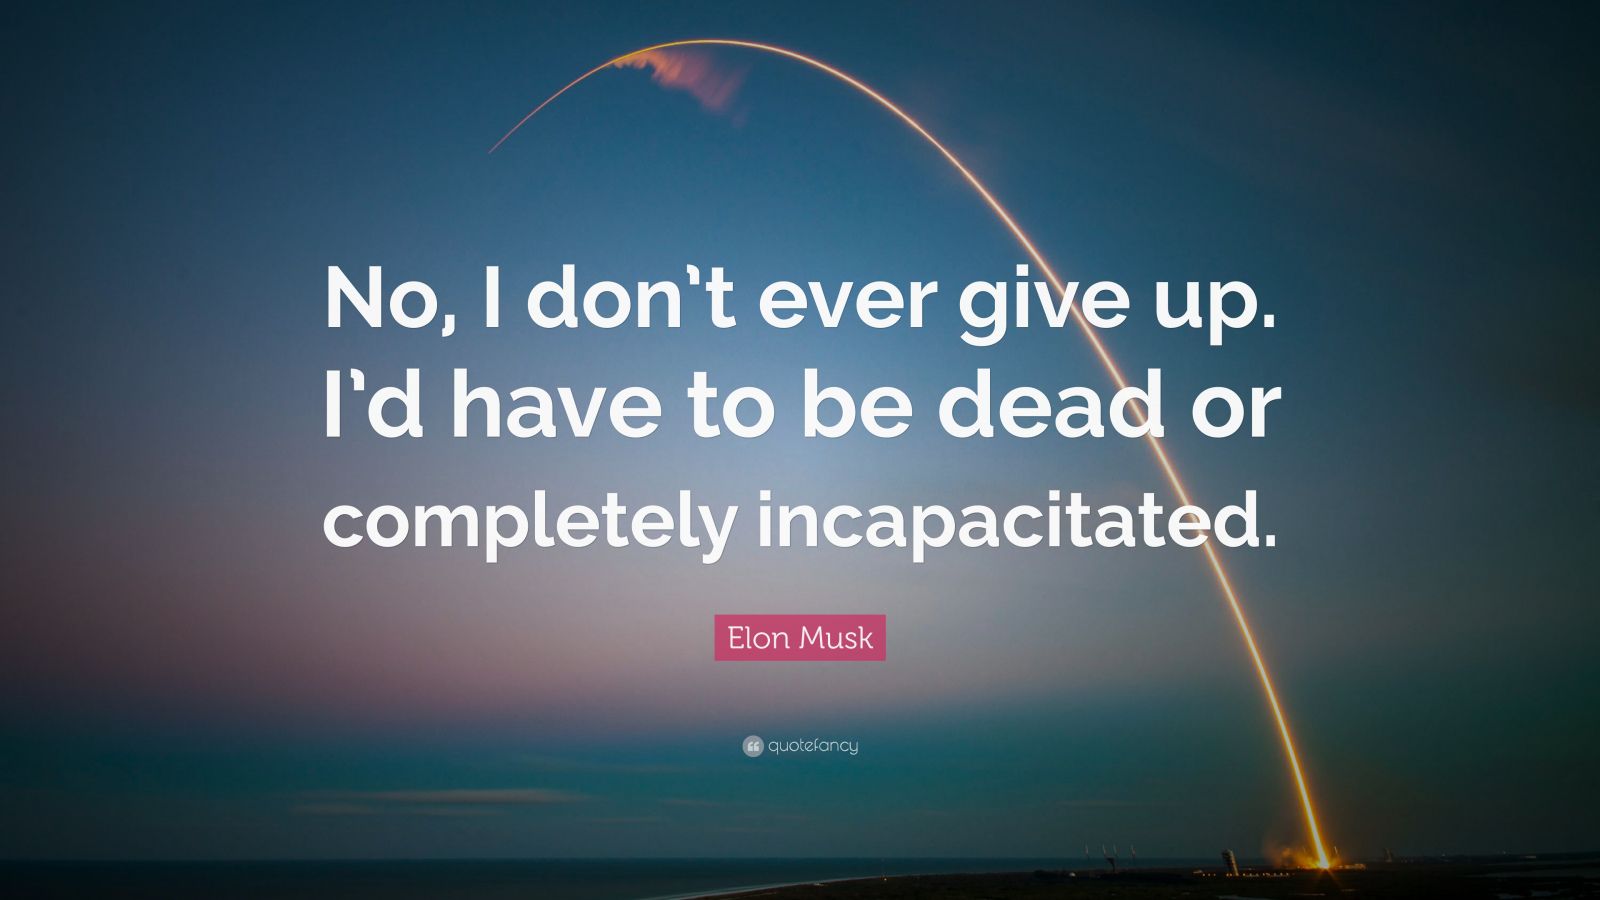 2001247-Elon-Musk-Quote-No-I-don-t-ever-give-up-I-d-have-to-be-dead-or.jpg